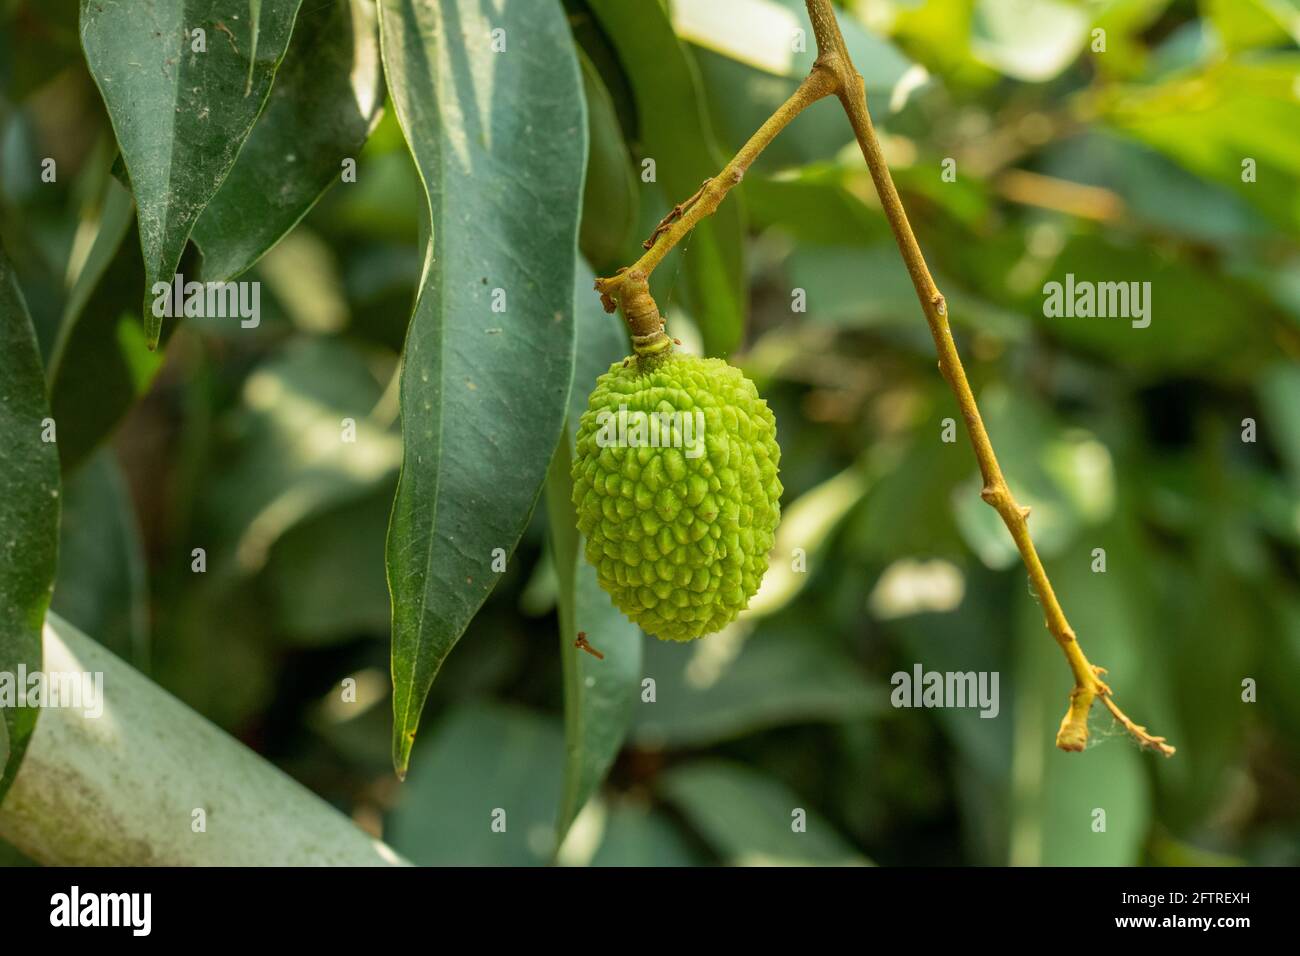 Single raw green litchi or lychee which is a seasonal fruit and very sweet delicious closeup shoot Stock Photo